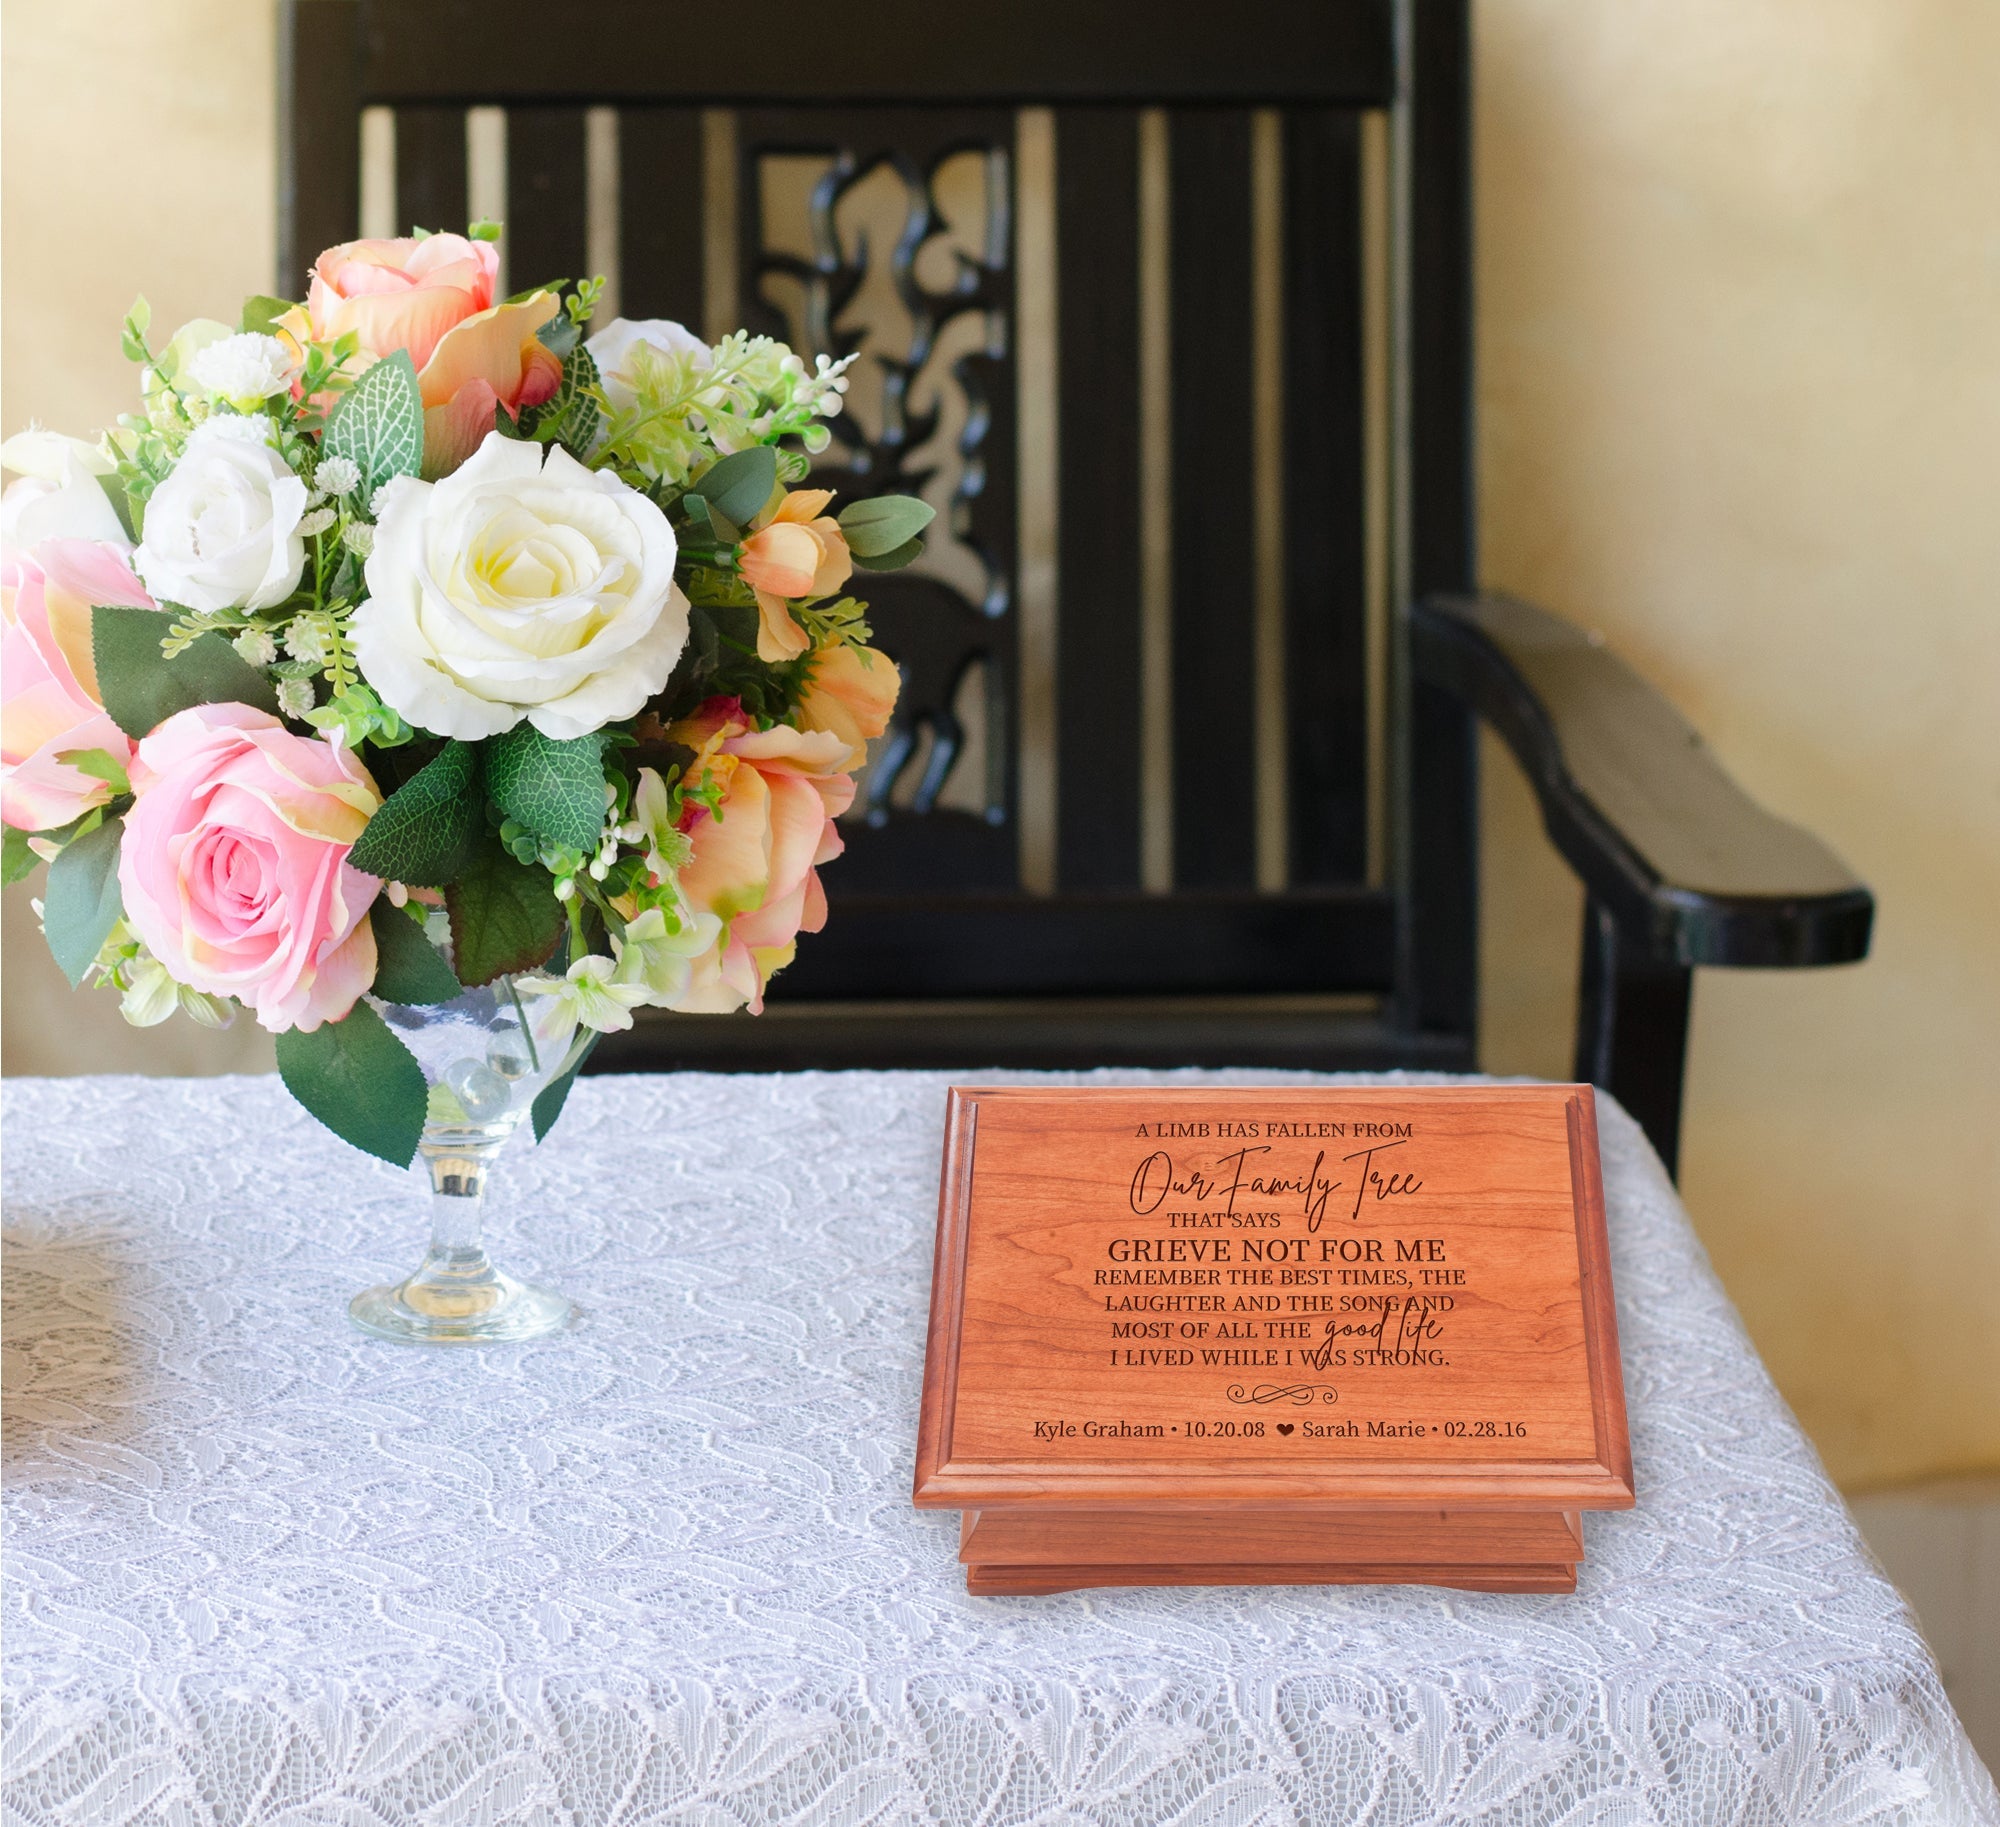 Personalized Cherry Wood Memorial Jewelry Box - A Limb Has Fallen - LifeSong Milestones